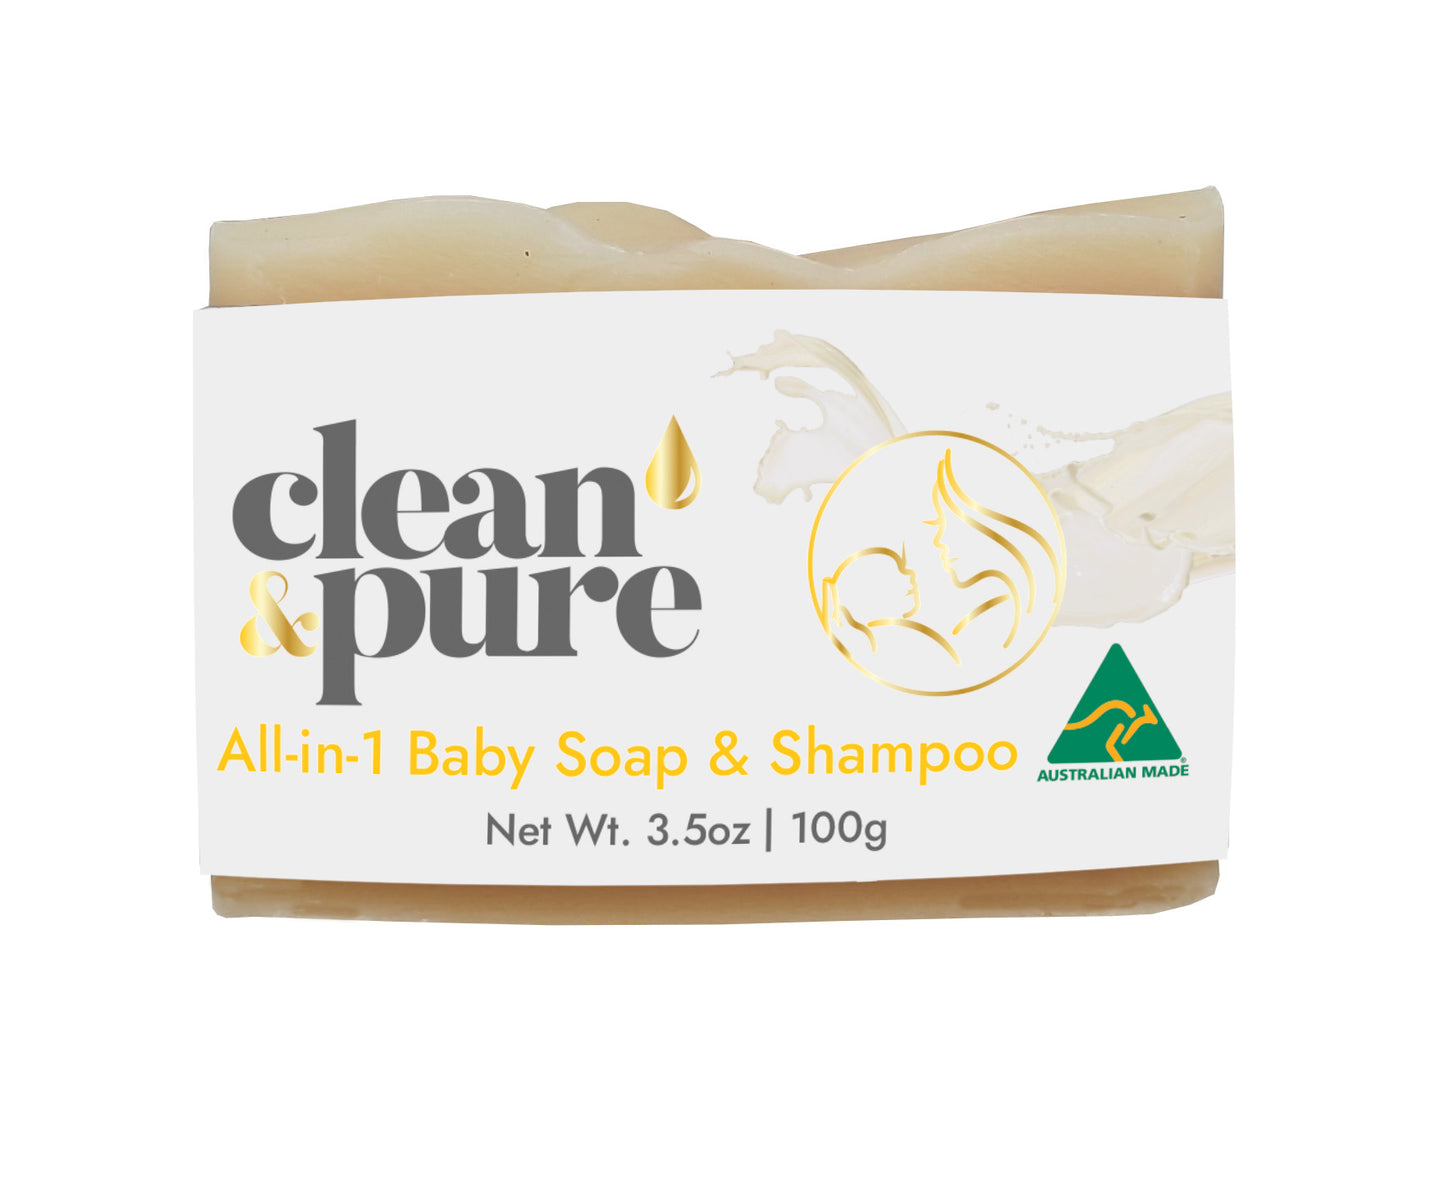 ALL IN ONE BABY SOAP & SHAMPOO